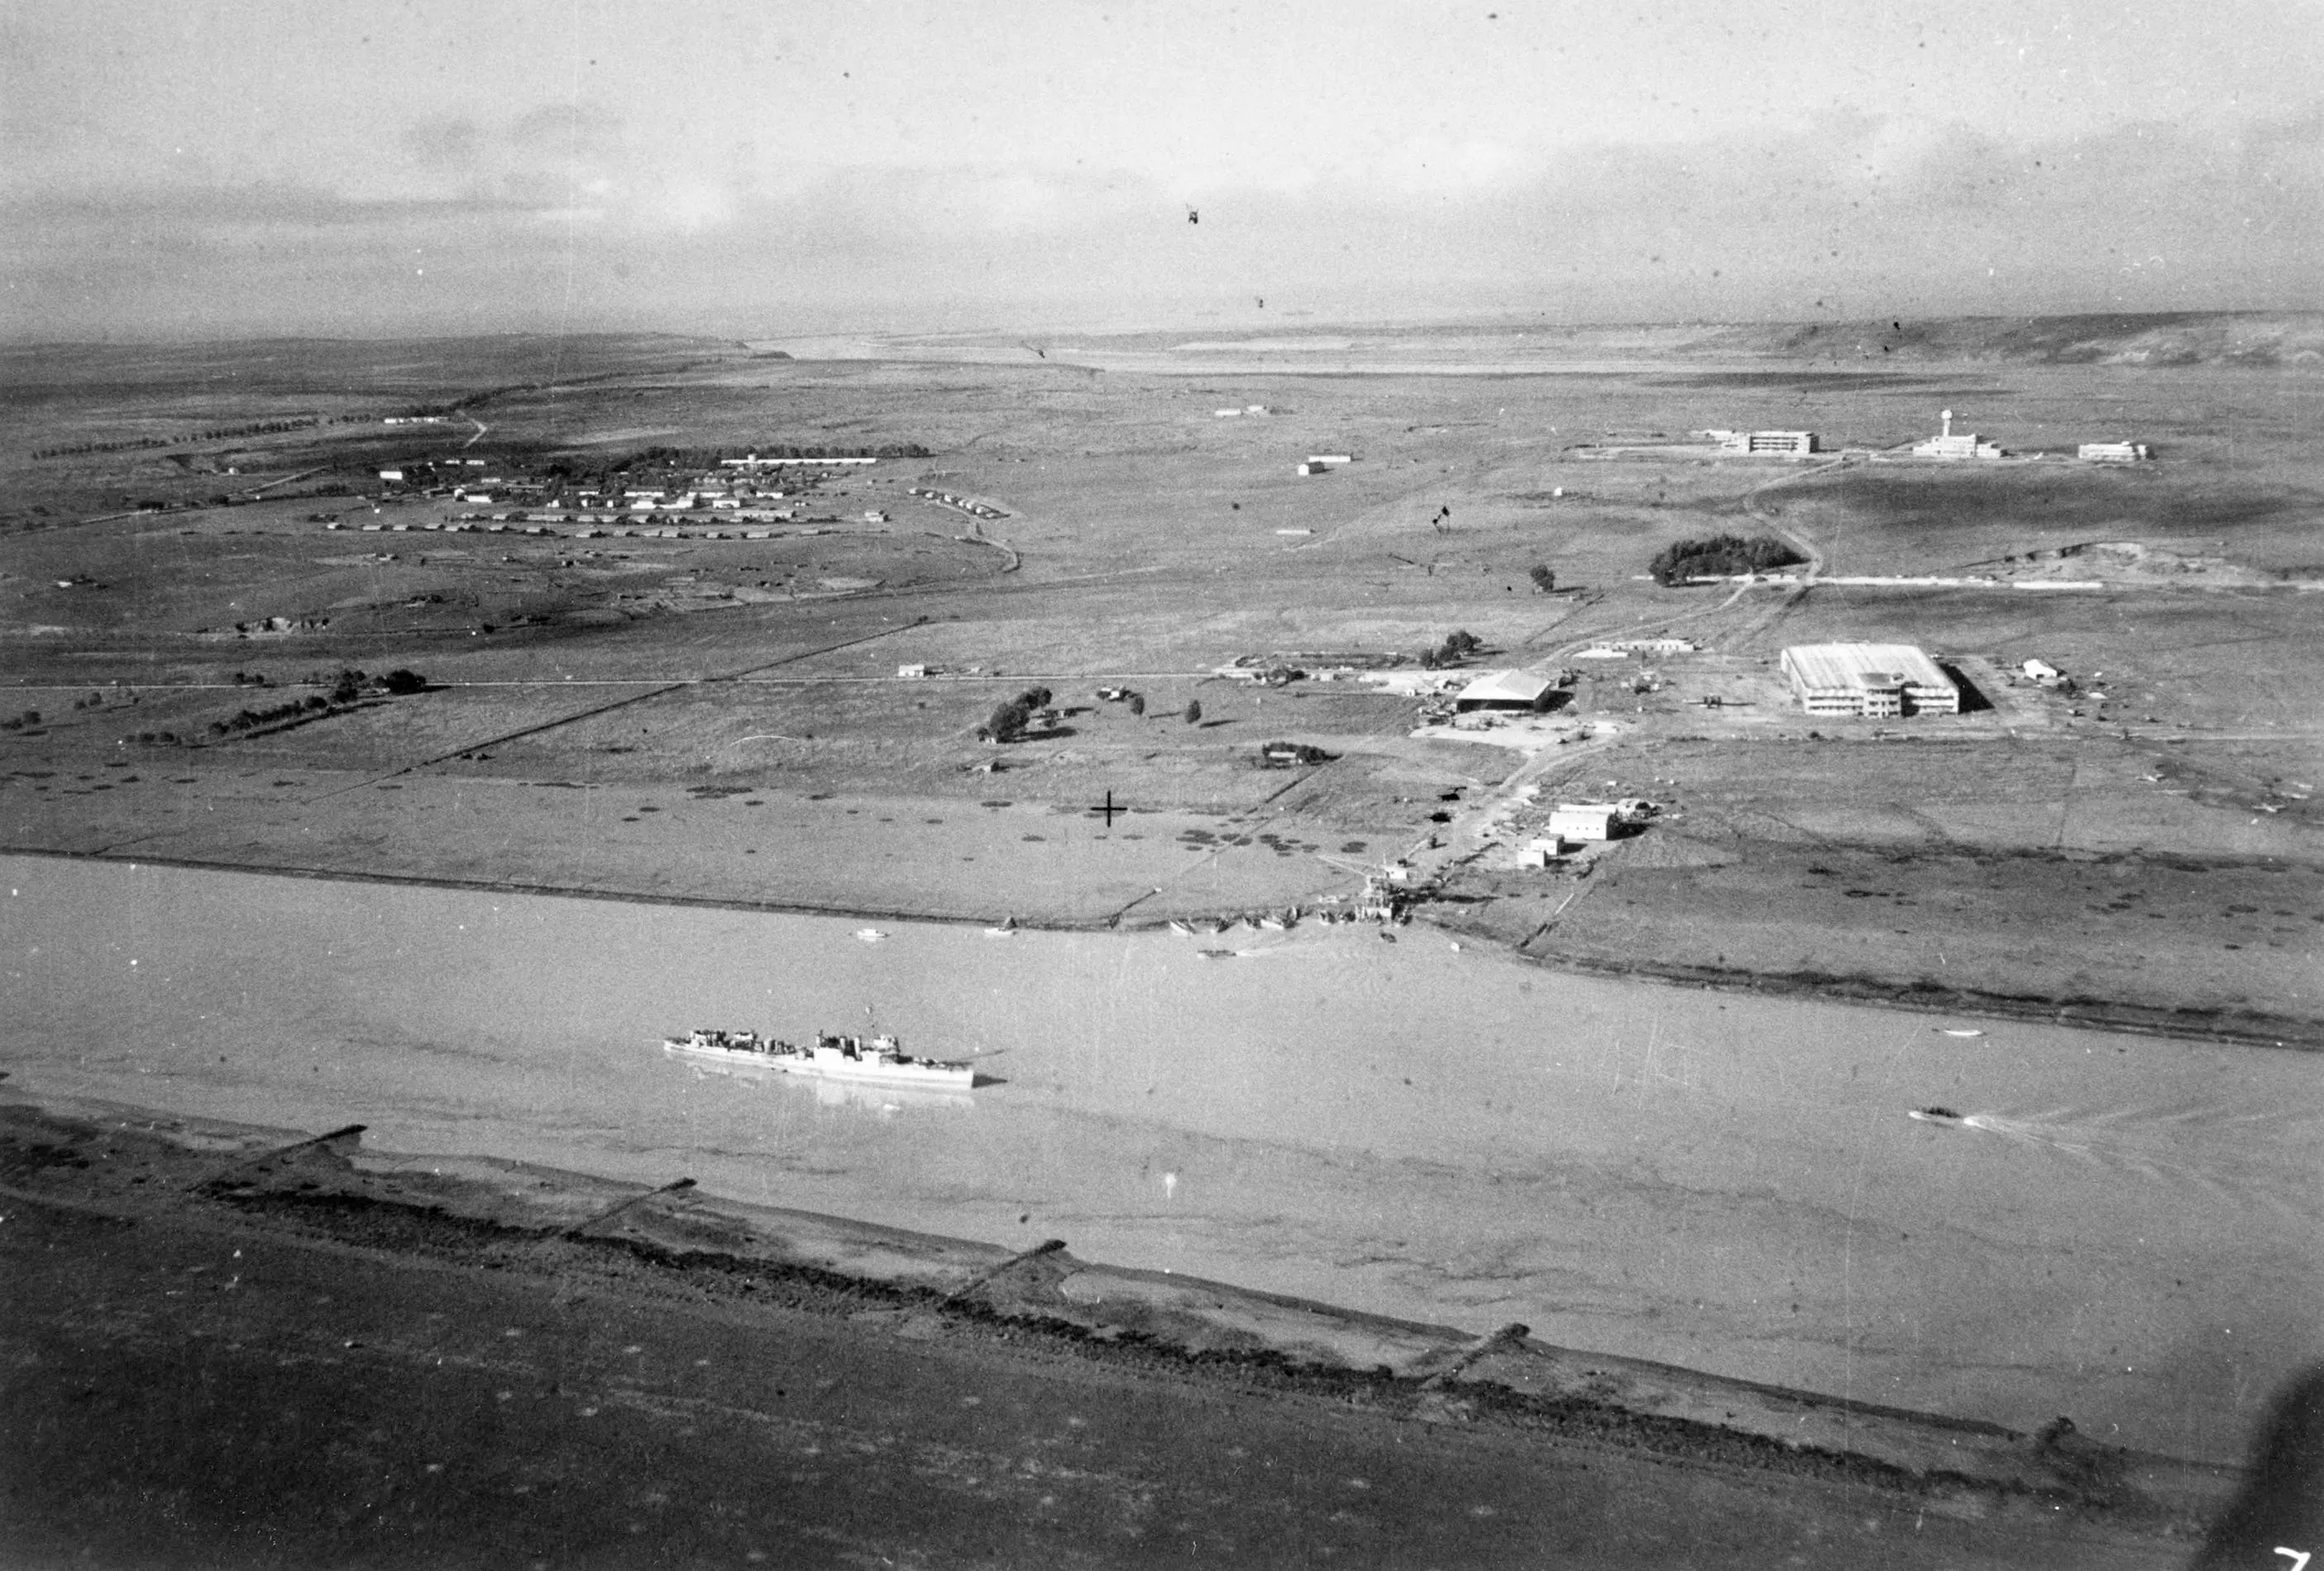 An aerial black and white photograph of a small facility on the banks of a river. In the river is a stationary ship, with several small boats beached on the river bank and a few moving about. The land is mostly flat and empty, with a small number of trees and a few buildings near where the boats landed. In the distance is a larger cluster of buildings and a few more scattered about, but the overall area is empty.